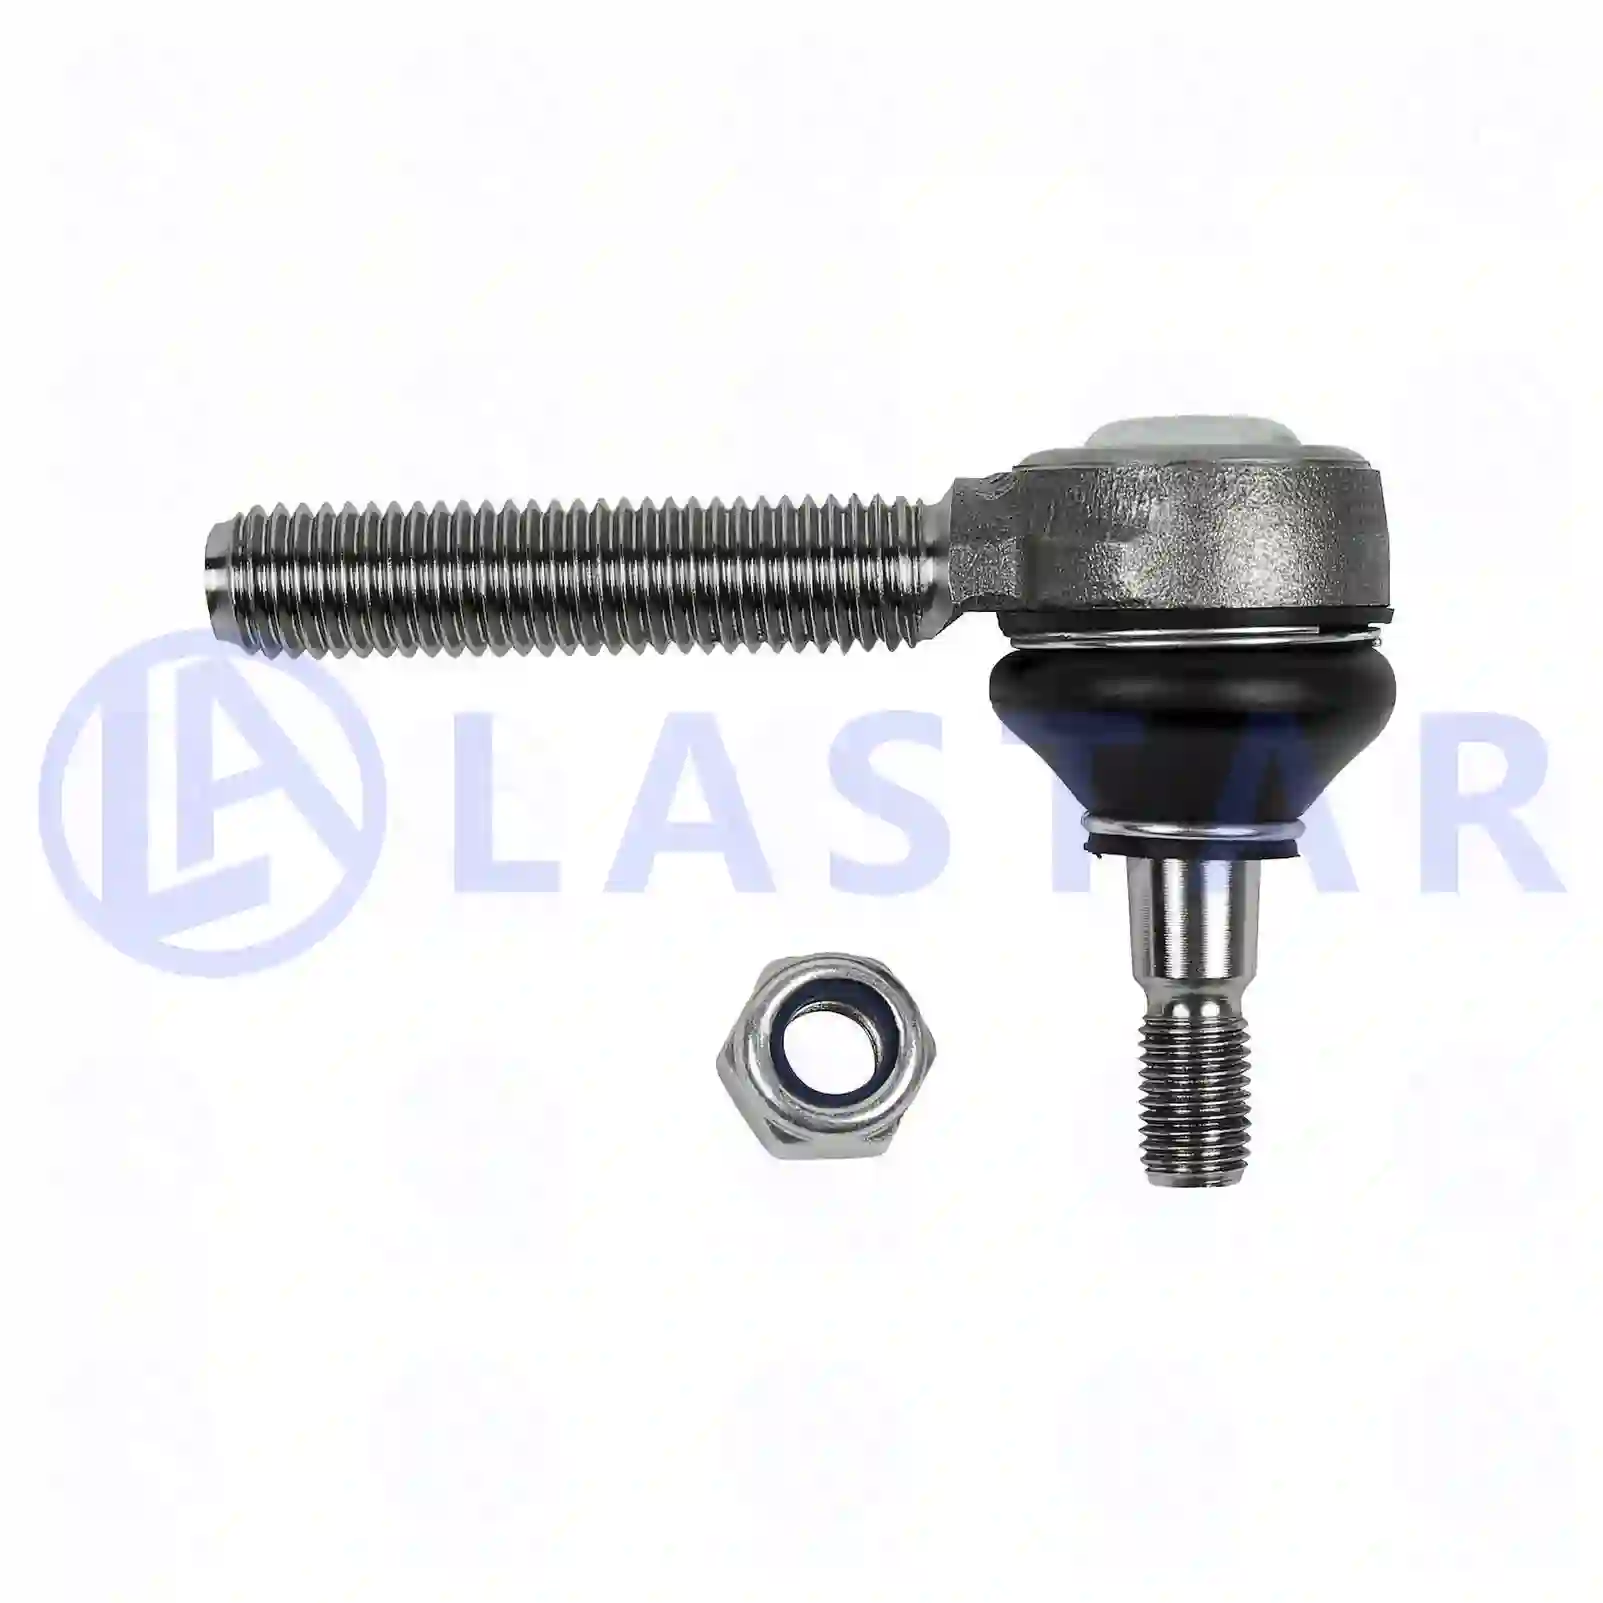 Ball joint, right hand thread, 77733295, 243664, 350270, ZG40139-0008, , ||  77733295 Lastar Spare Part | Truck Spare Parts, Auotomotive Spare Parts Ball joint, right hand thread, 77733295, 243664, 350270, ZG40139-0008, , ||  77733295 Lastar Spare Part | Truck Spare Parts, Auotomotive Spare Parts